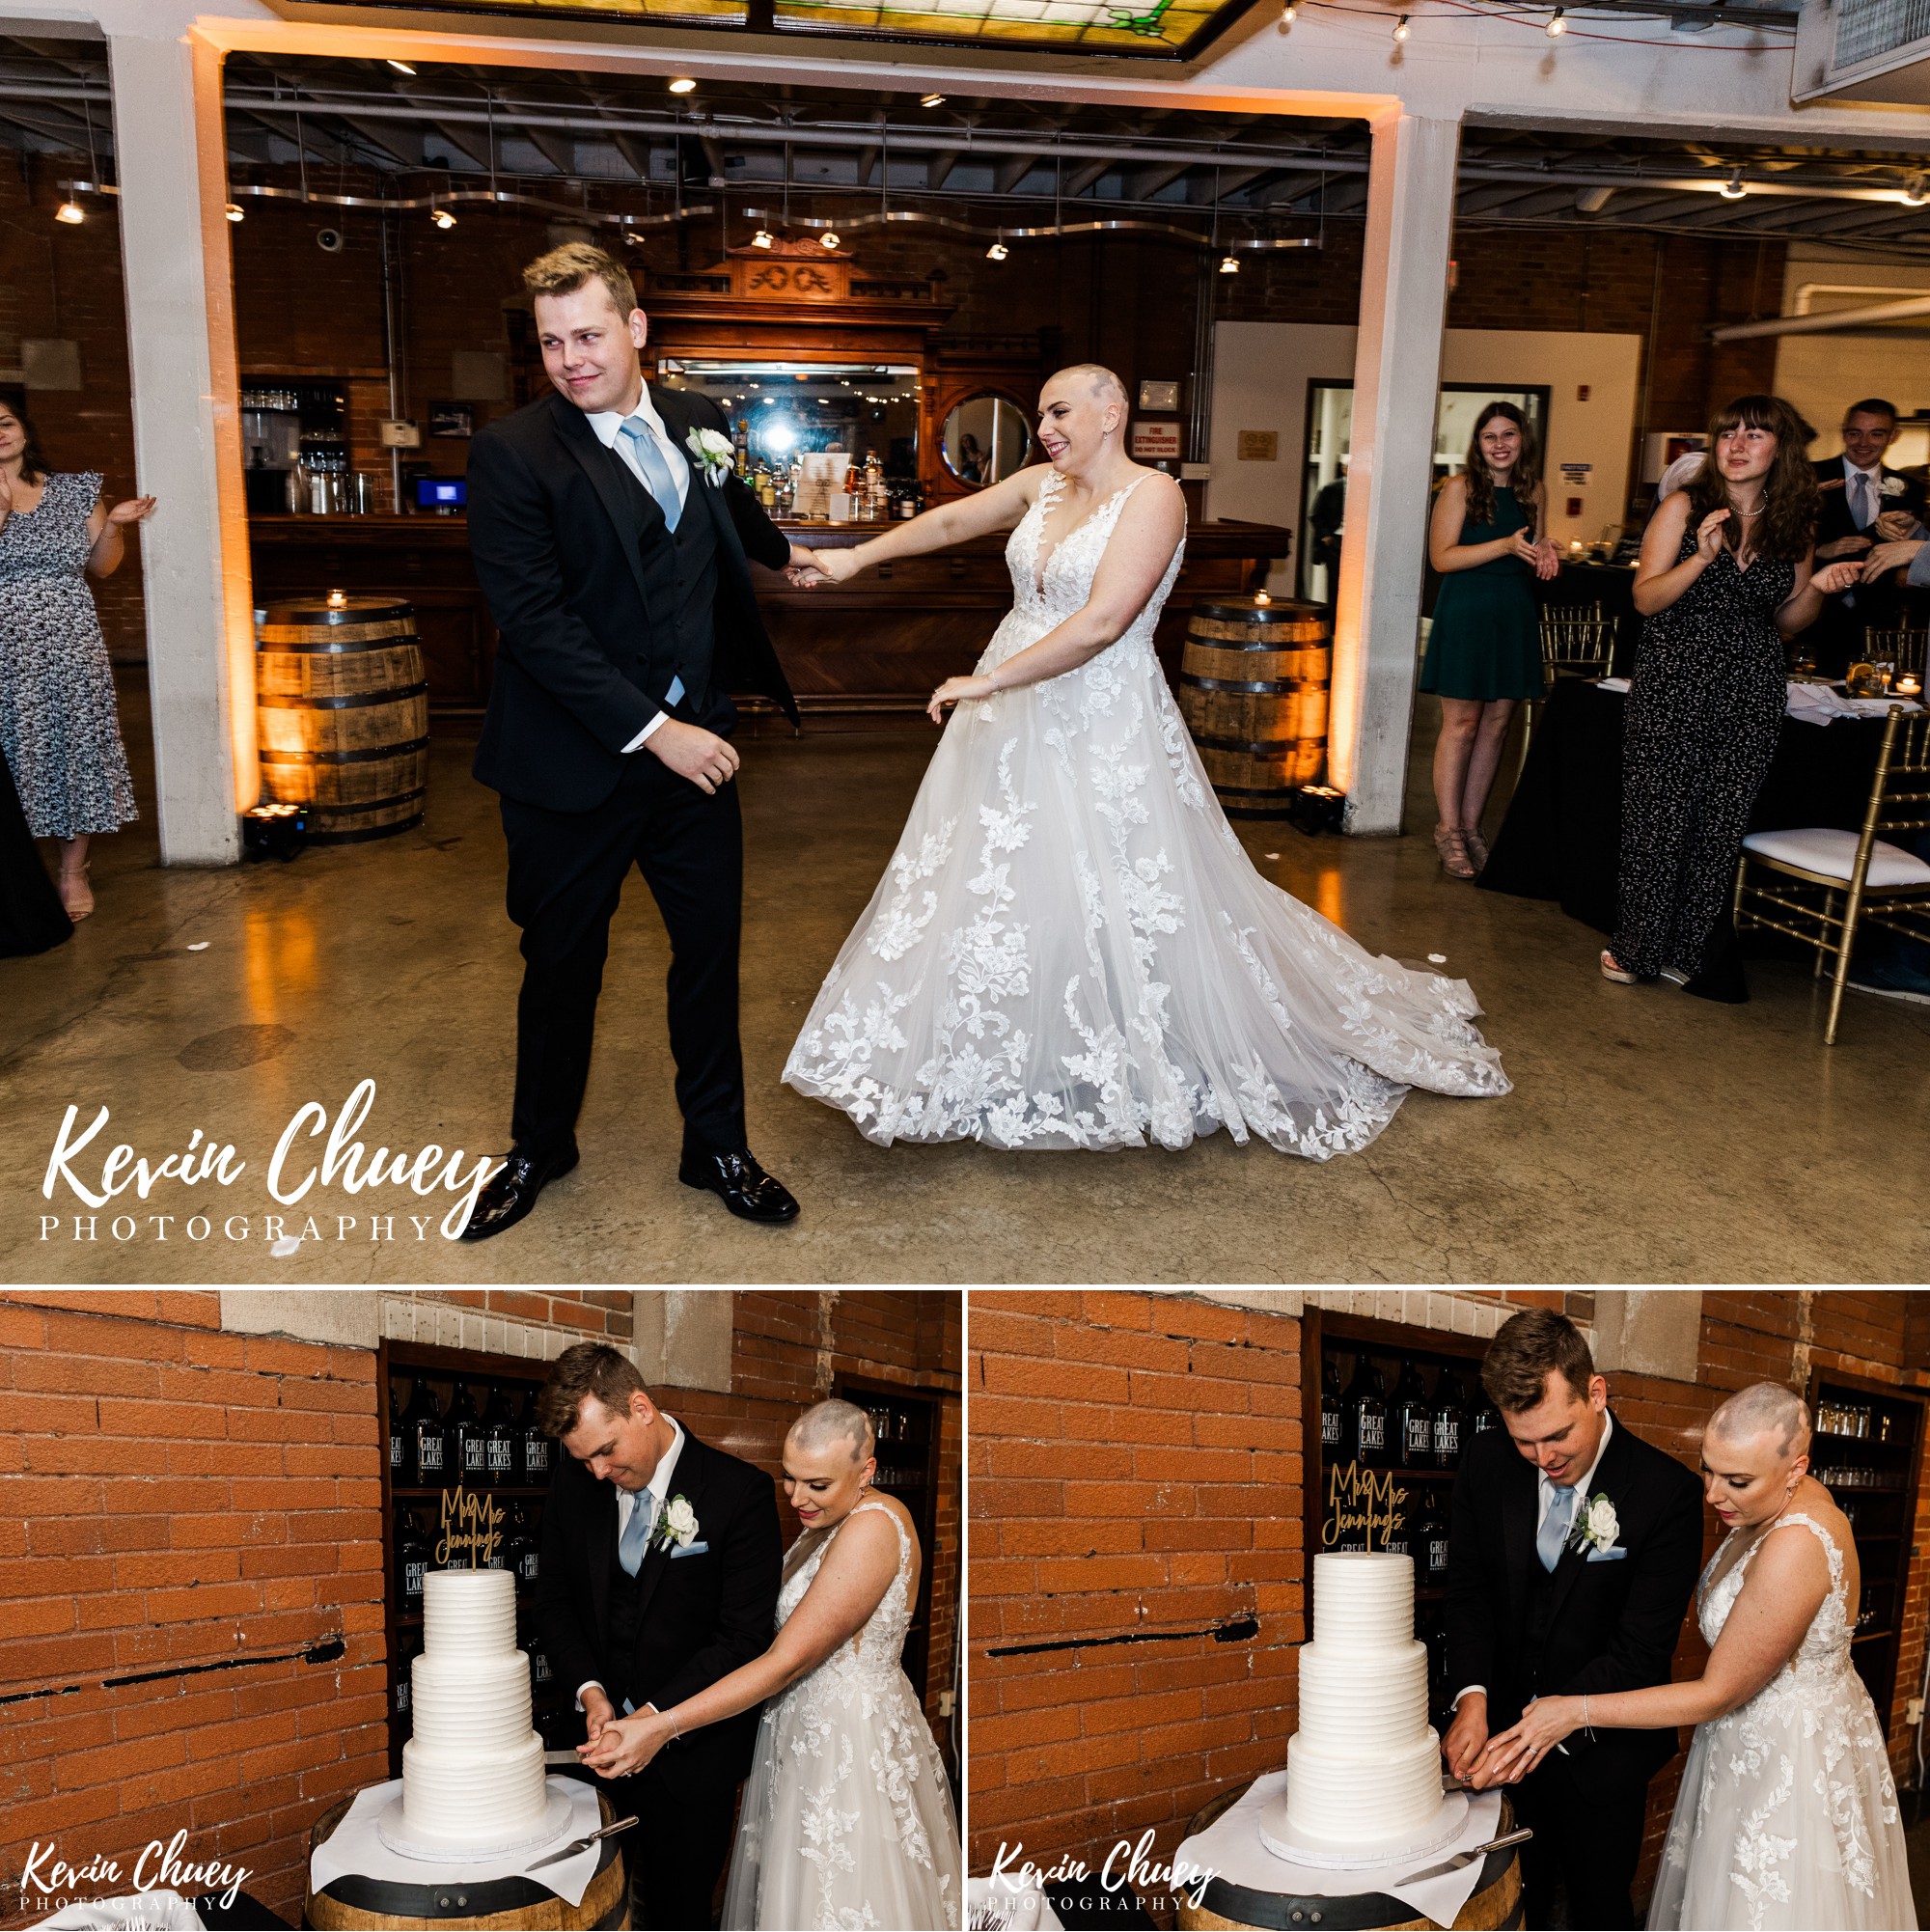 Great Lakes Brewing Company Tasting Room Wedding - Reception Introduction and Cake Cutting